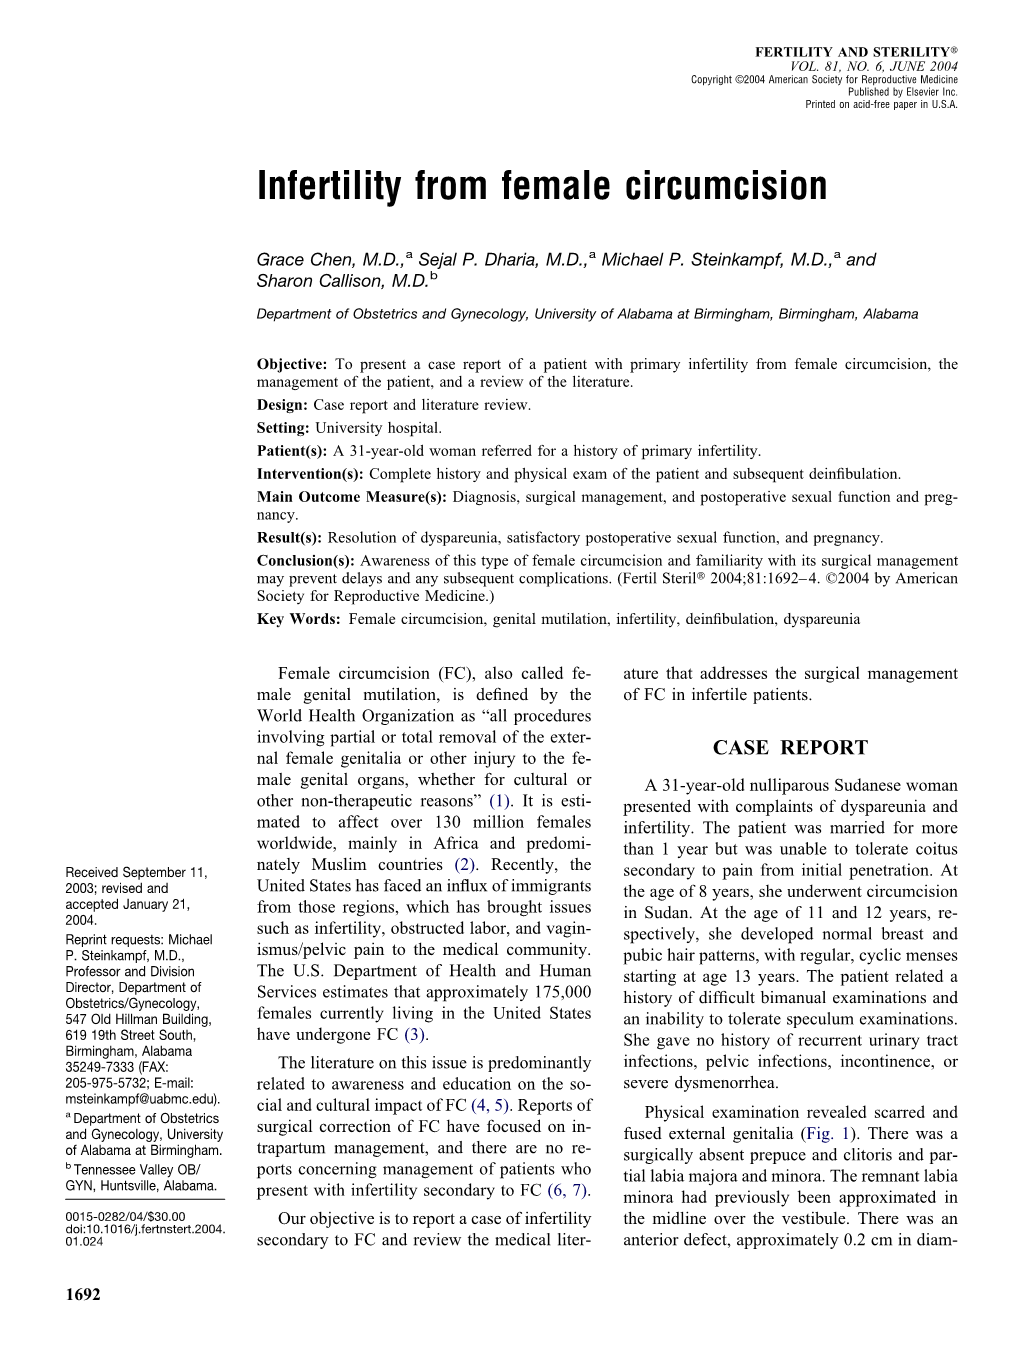 Infertility from Female Circumcision